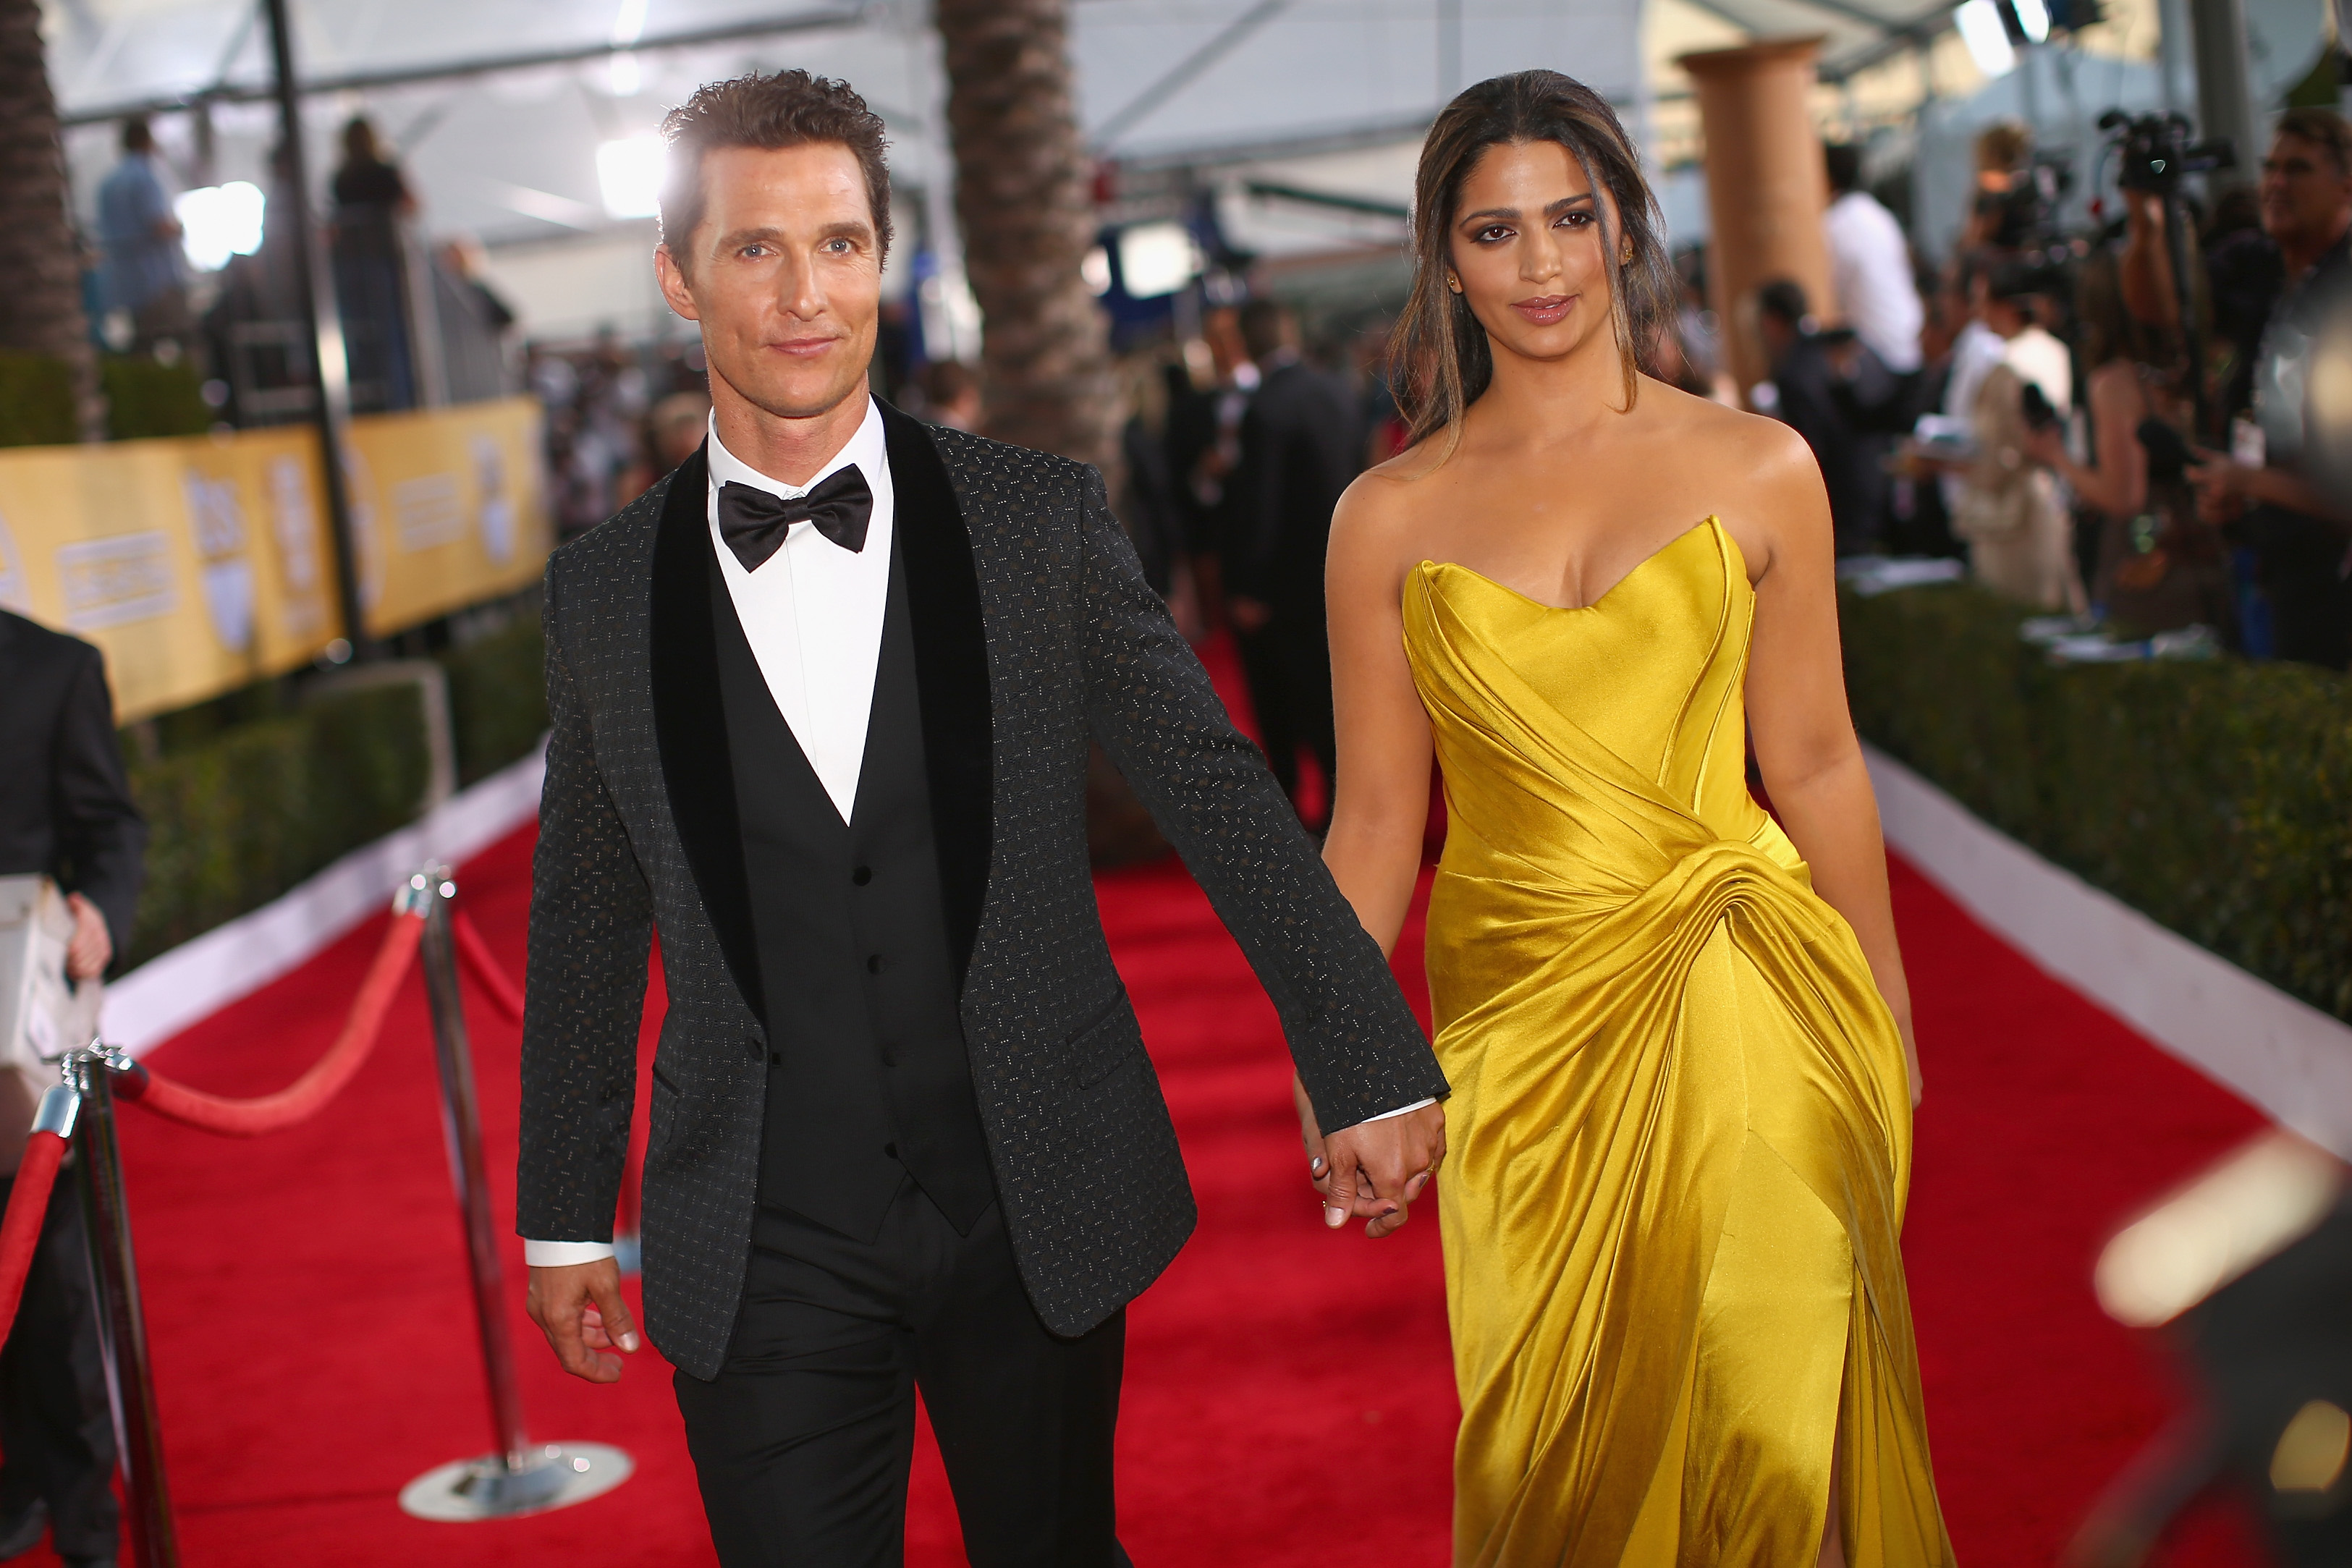 Matthew McConaughey and Camila Alves McConaughey at the 20th Annual Screen Actors Guild Awards on January 18, 2014, in Los Angeles, California | Source: Getty Images